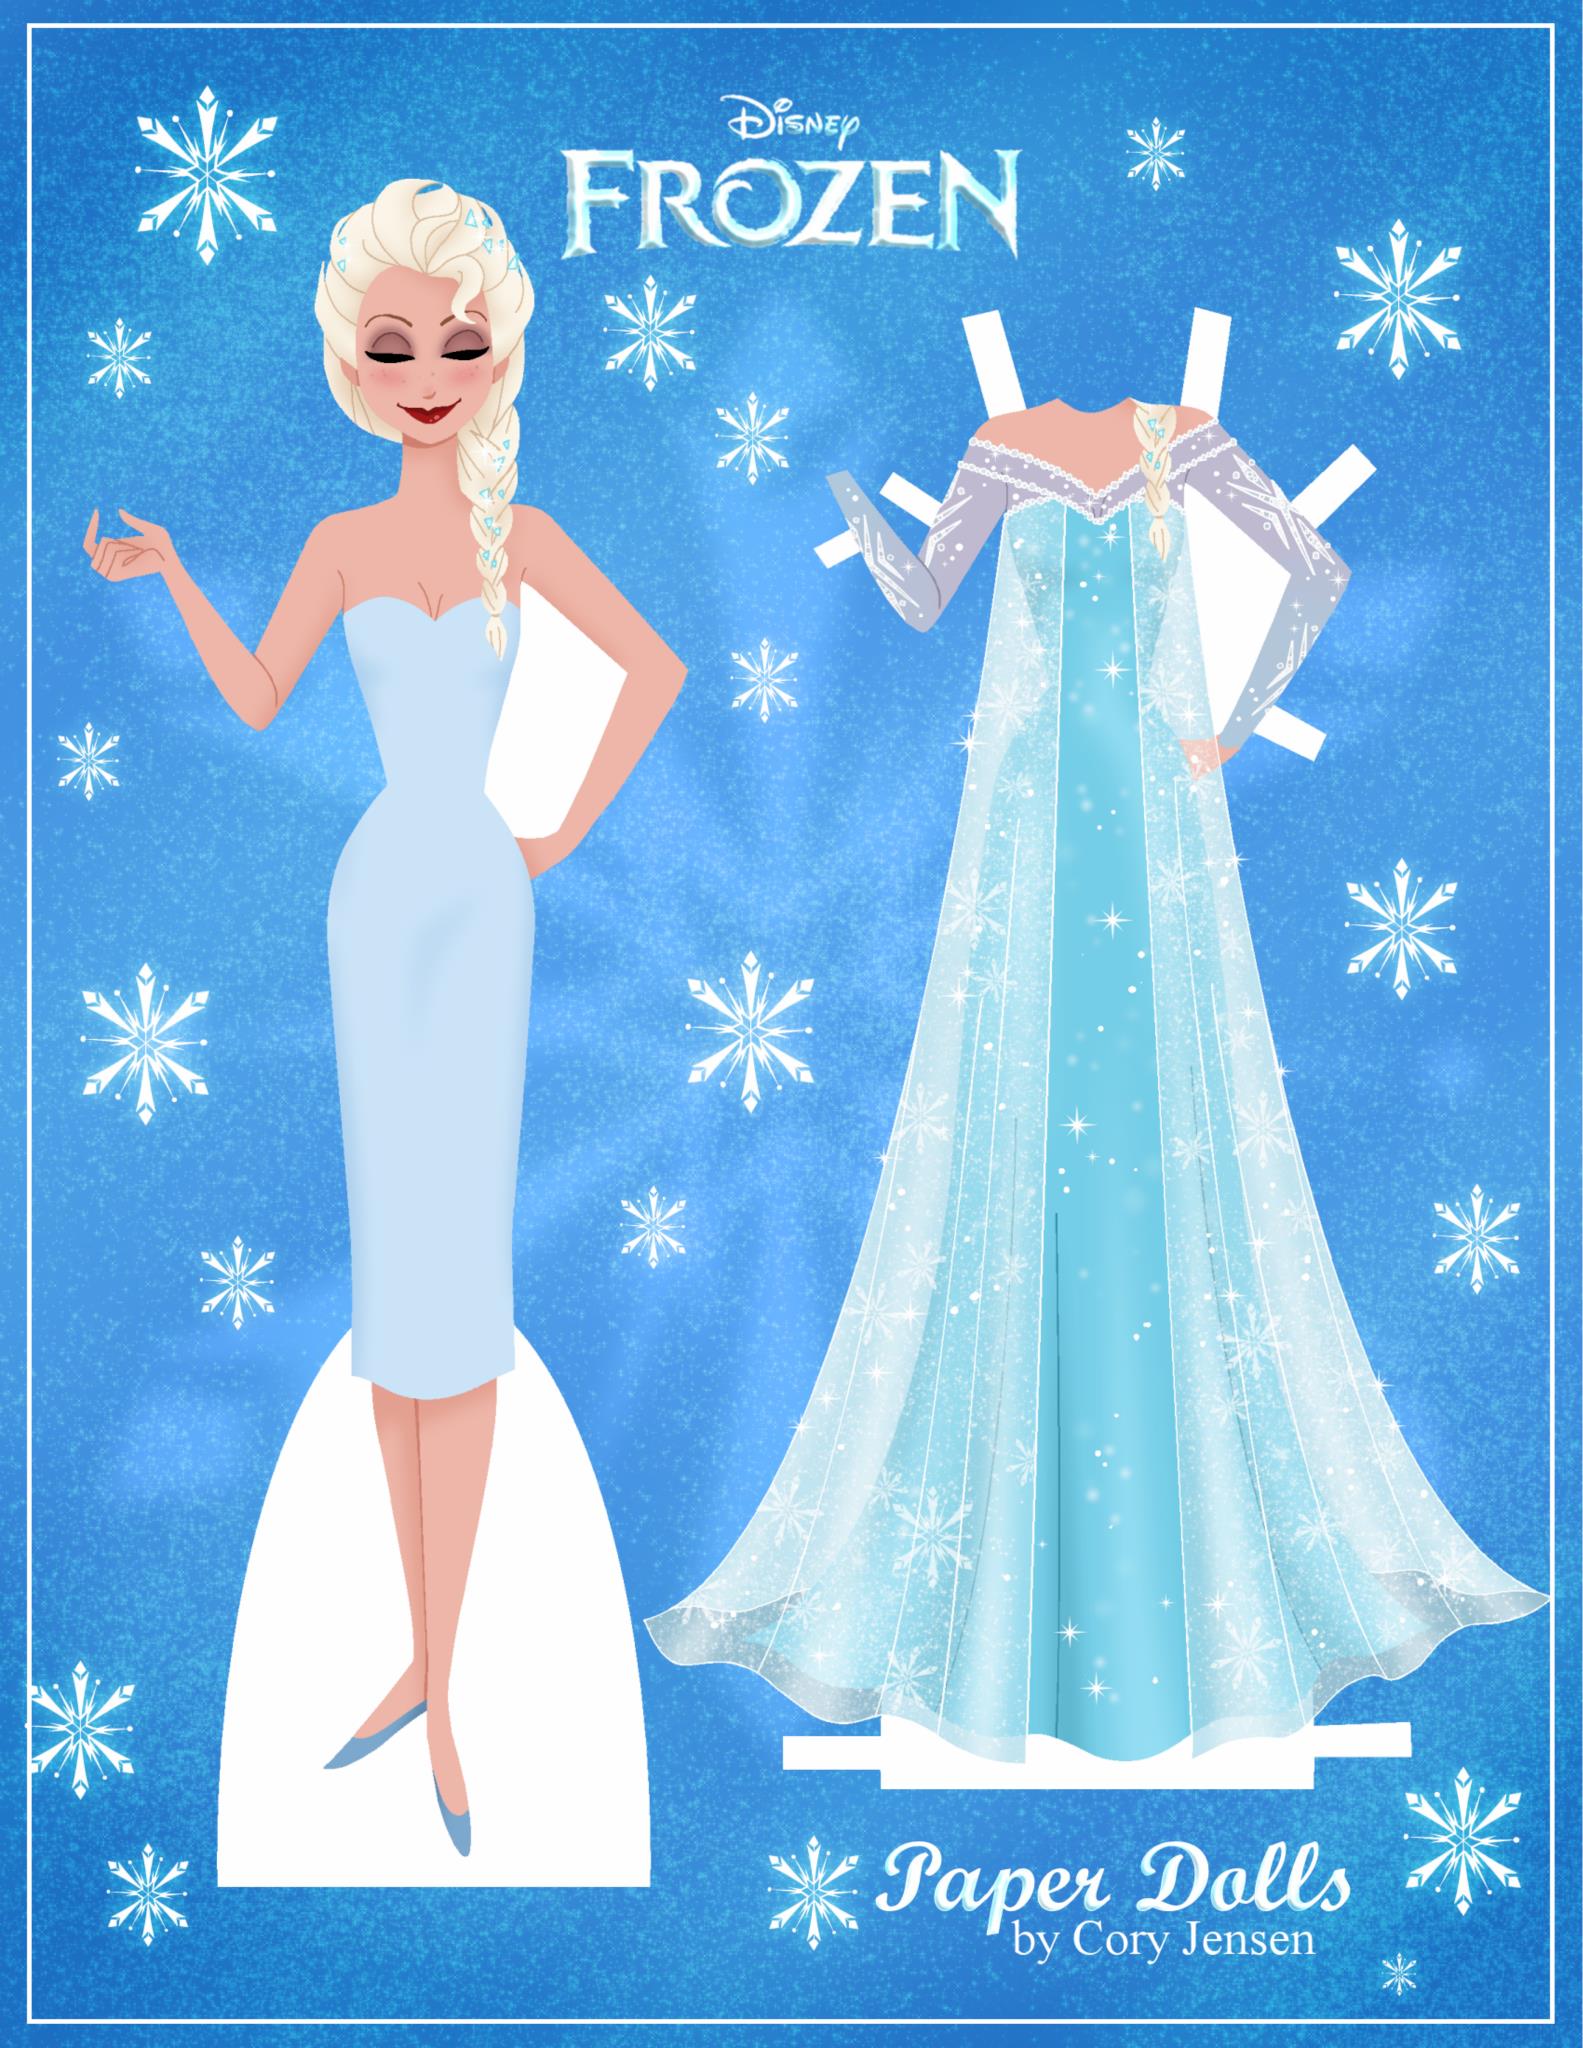 Frozen 2 Elsa and Anna paper dolls with clothing and dresses from the ...